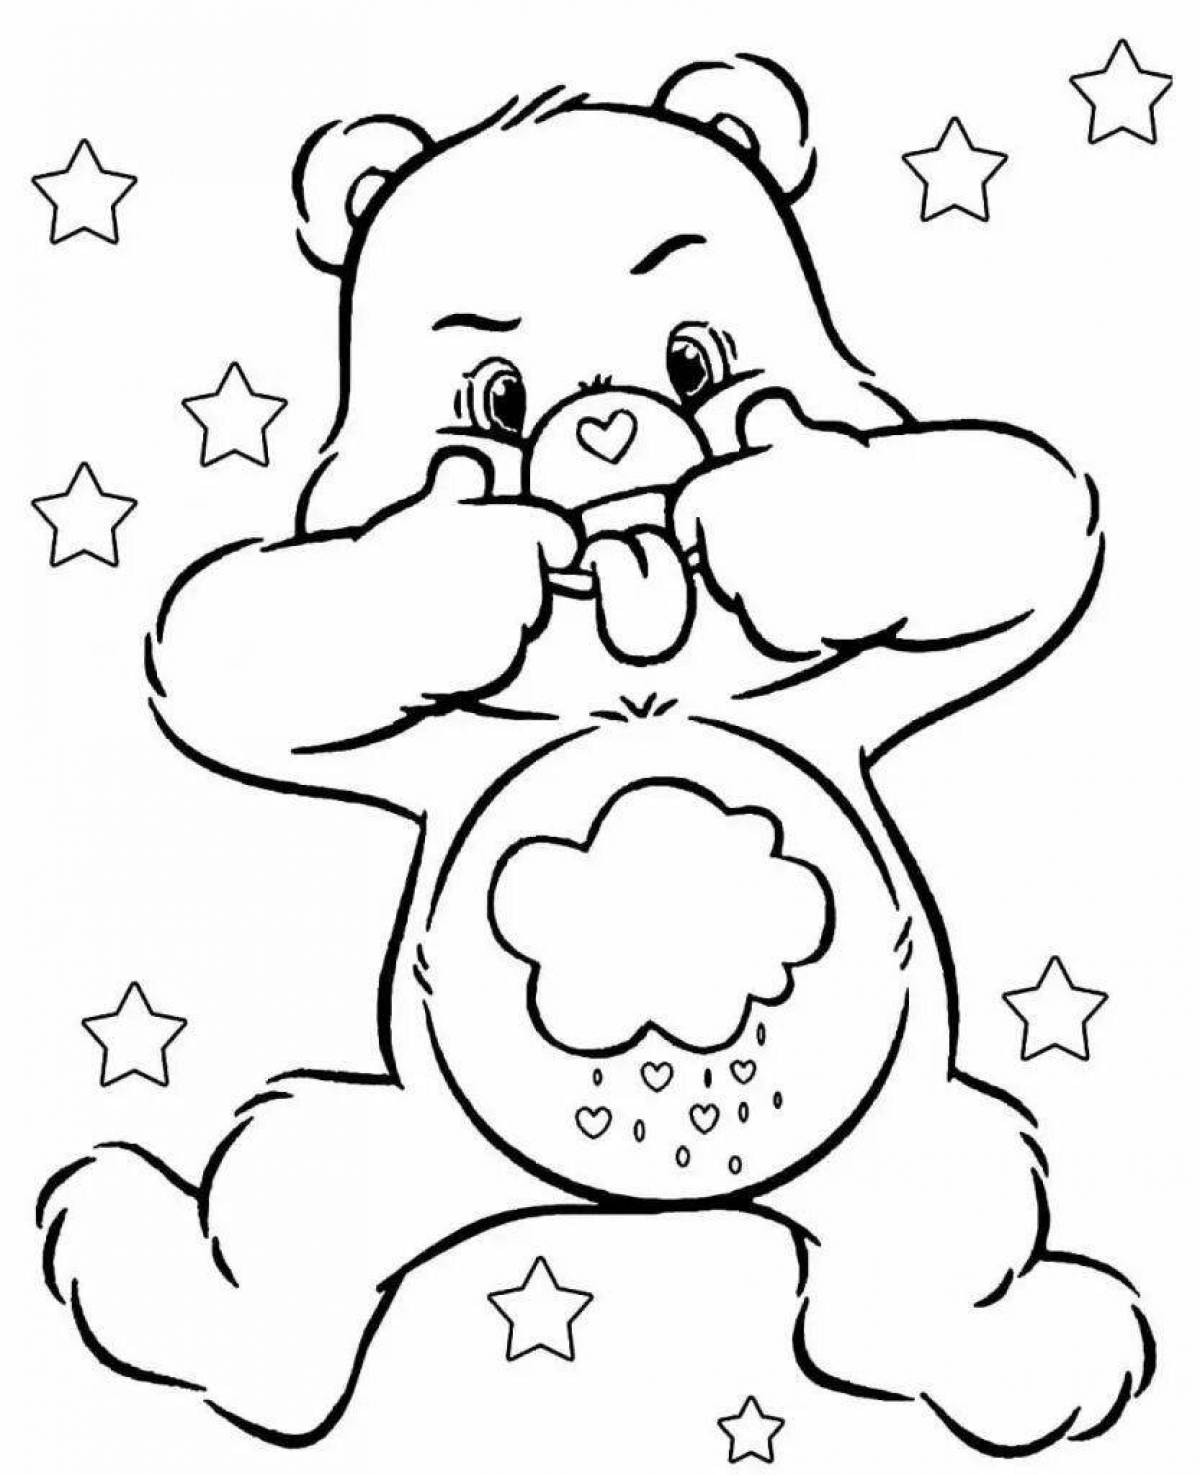 Coloring book funny bear with a bow